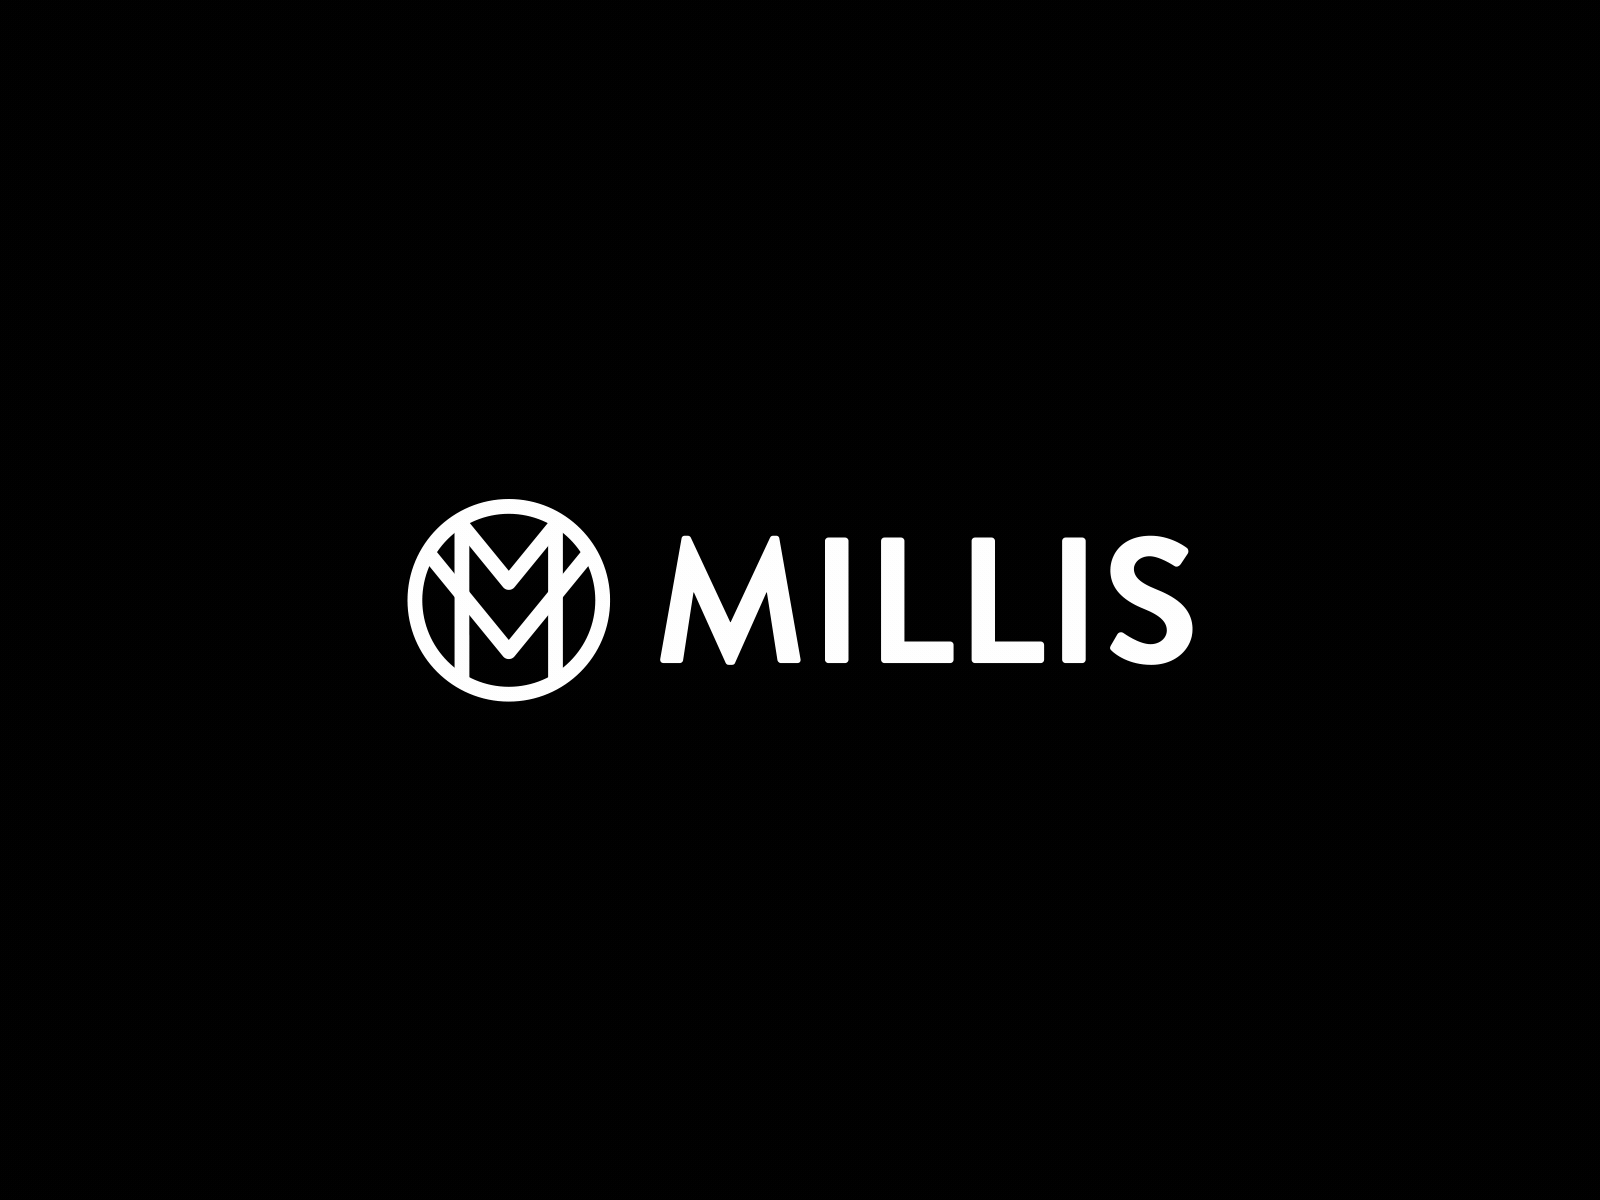 Millis Logo Animation By Fede Cook On Dribbble 13248 | Hot Sex Picture